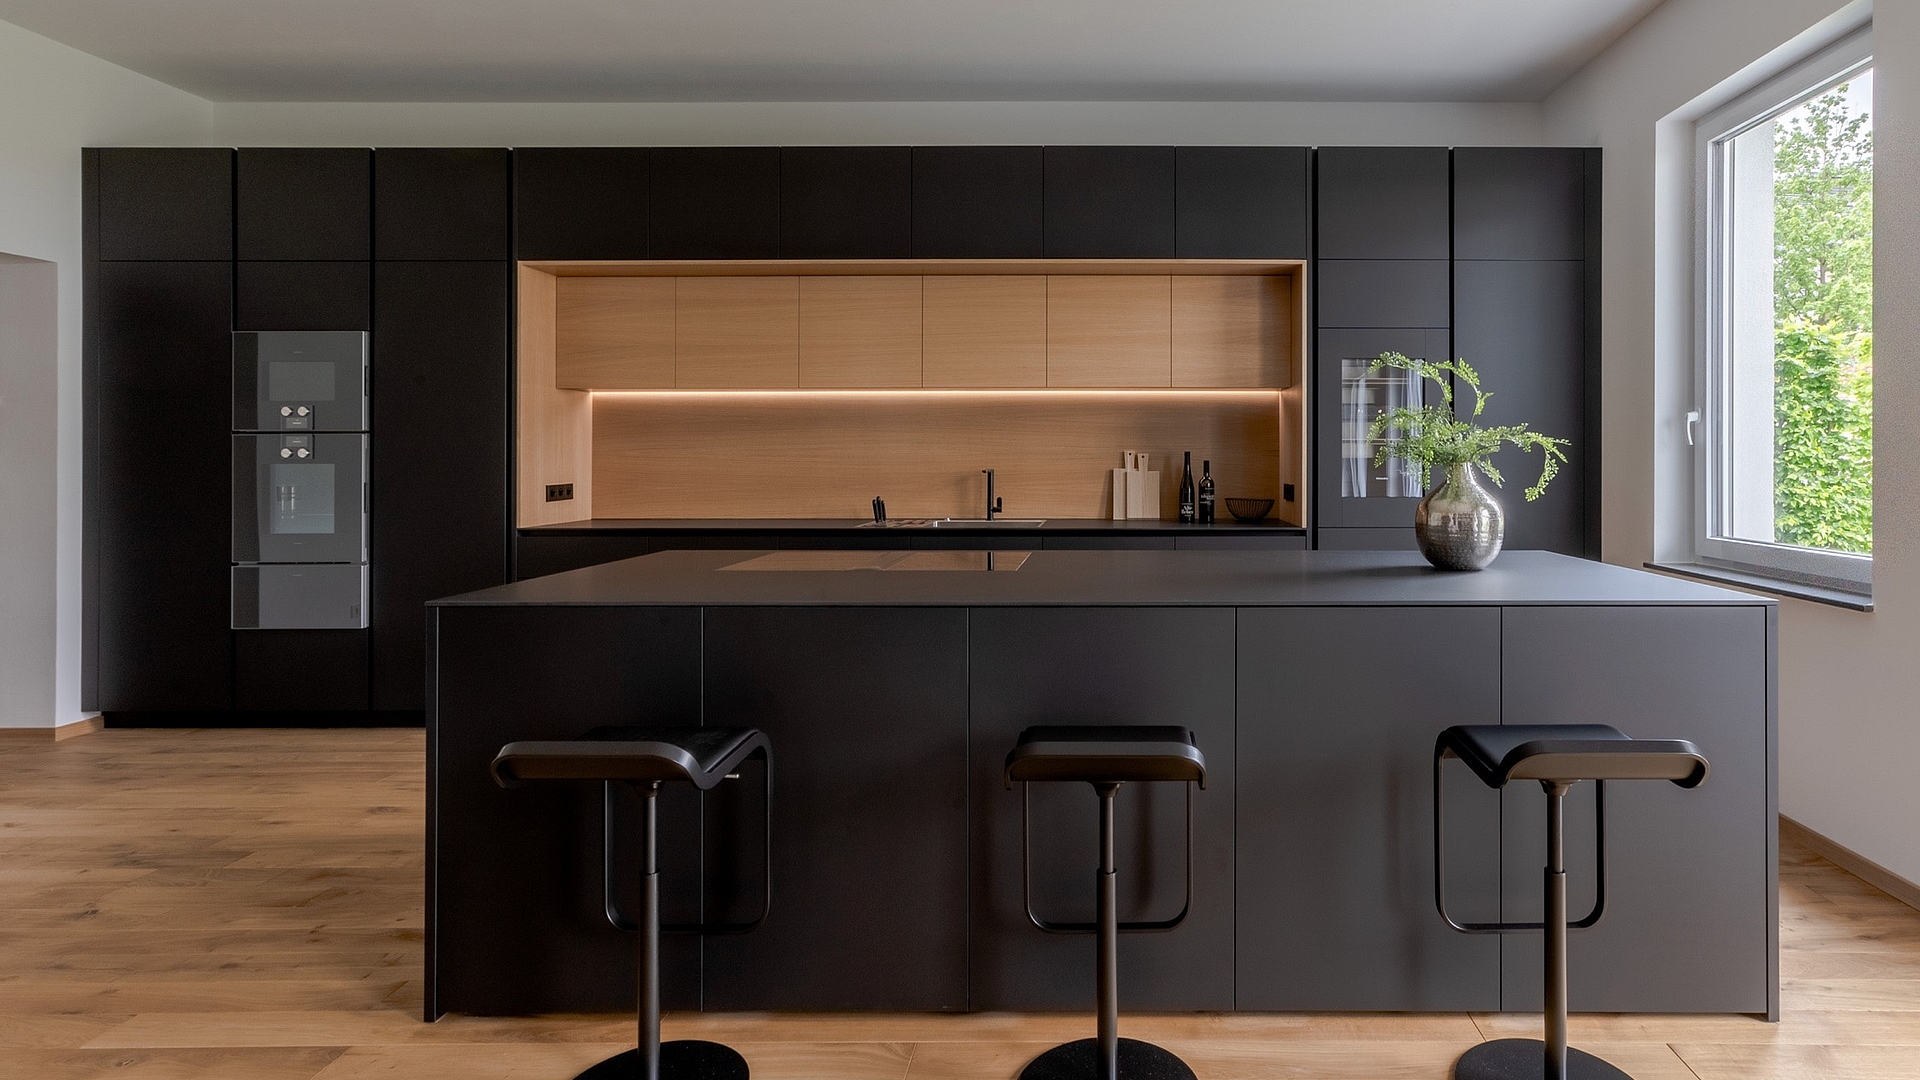 Black kitchens - on the trail of the design trend